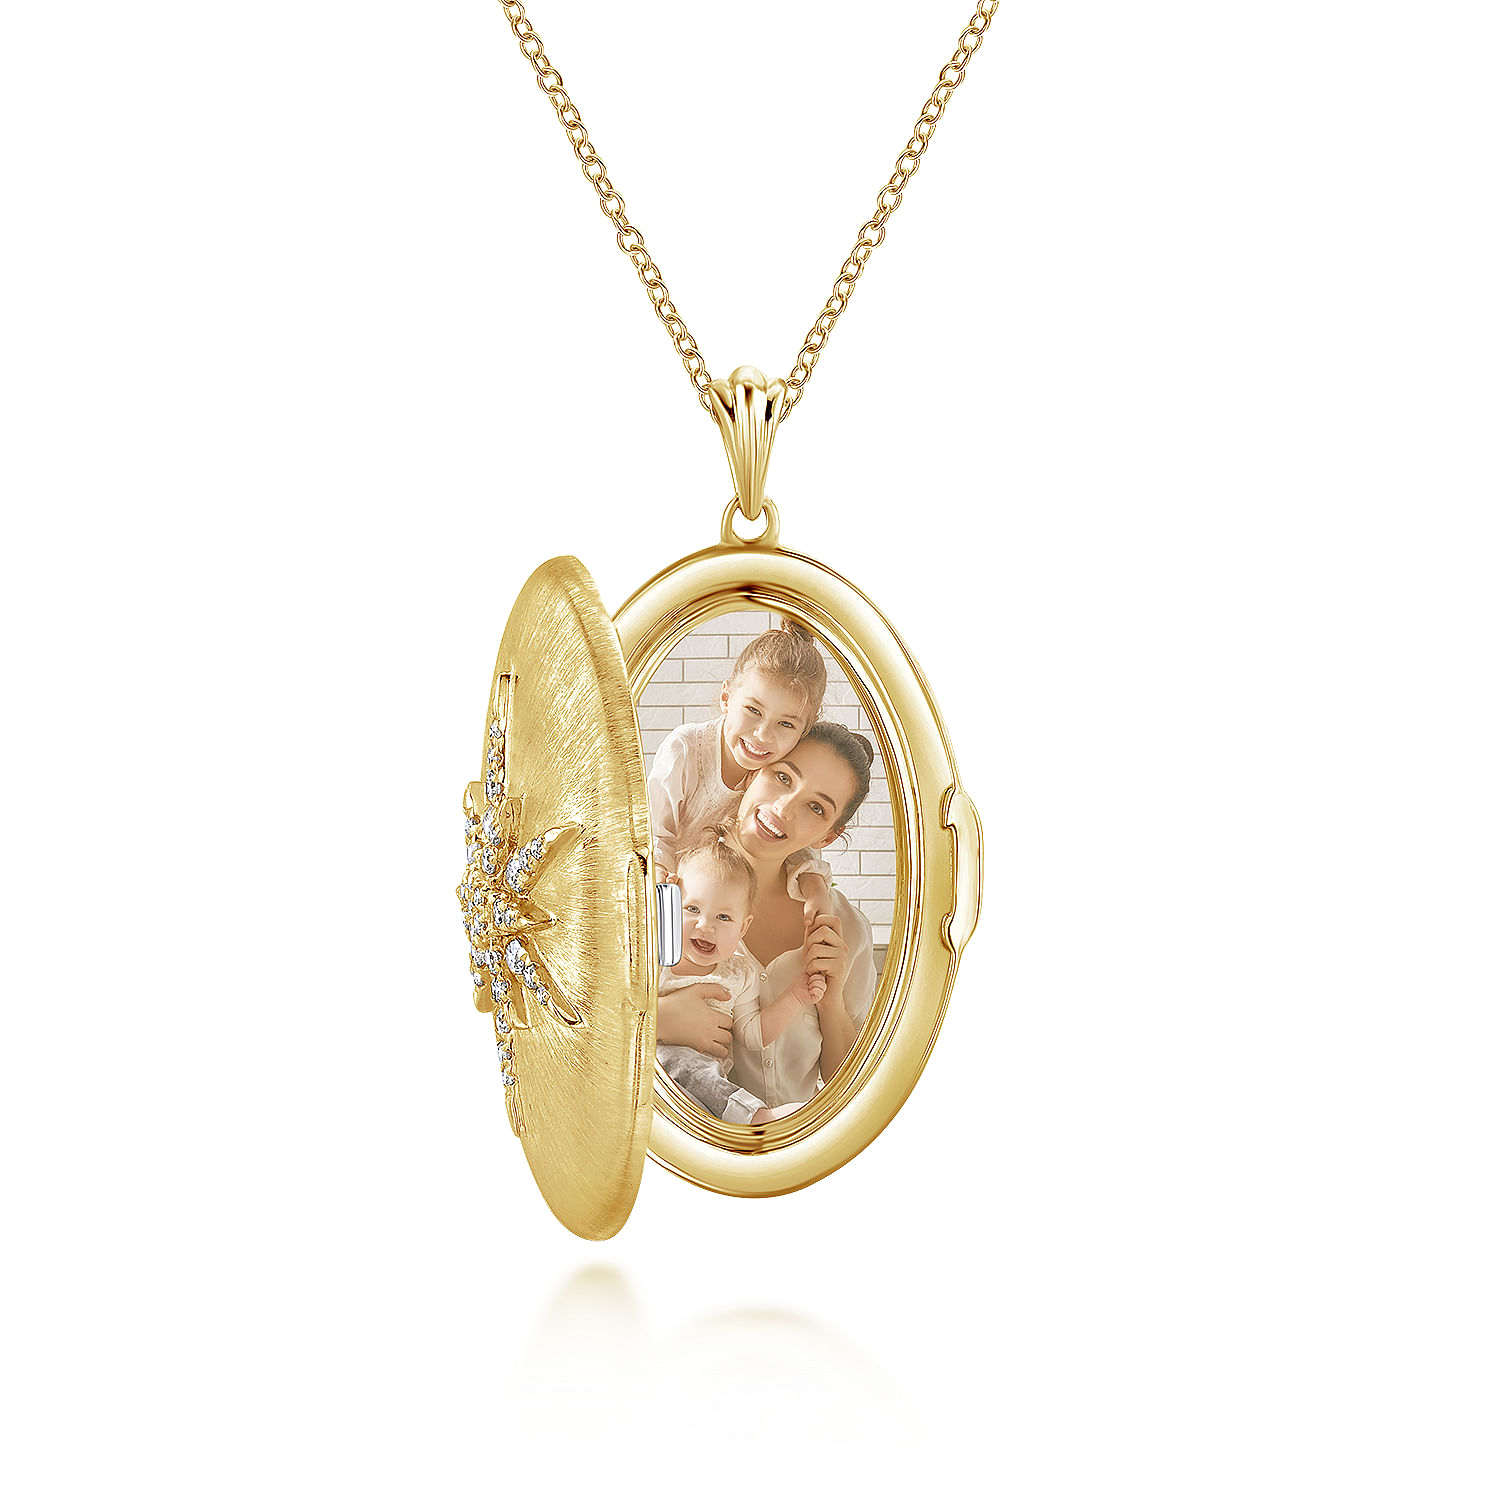 25 inch 14K Yellow Gold Oval Locket Necklace with Diamond Starburst Overlay